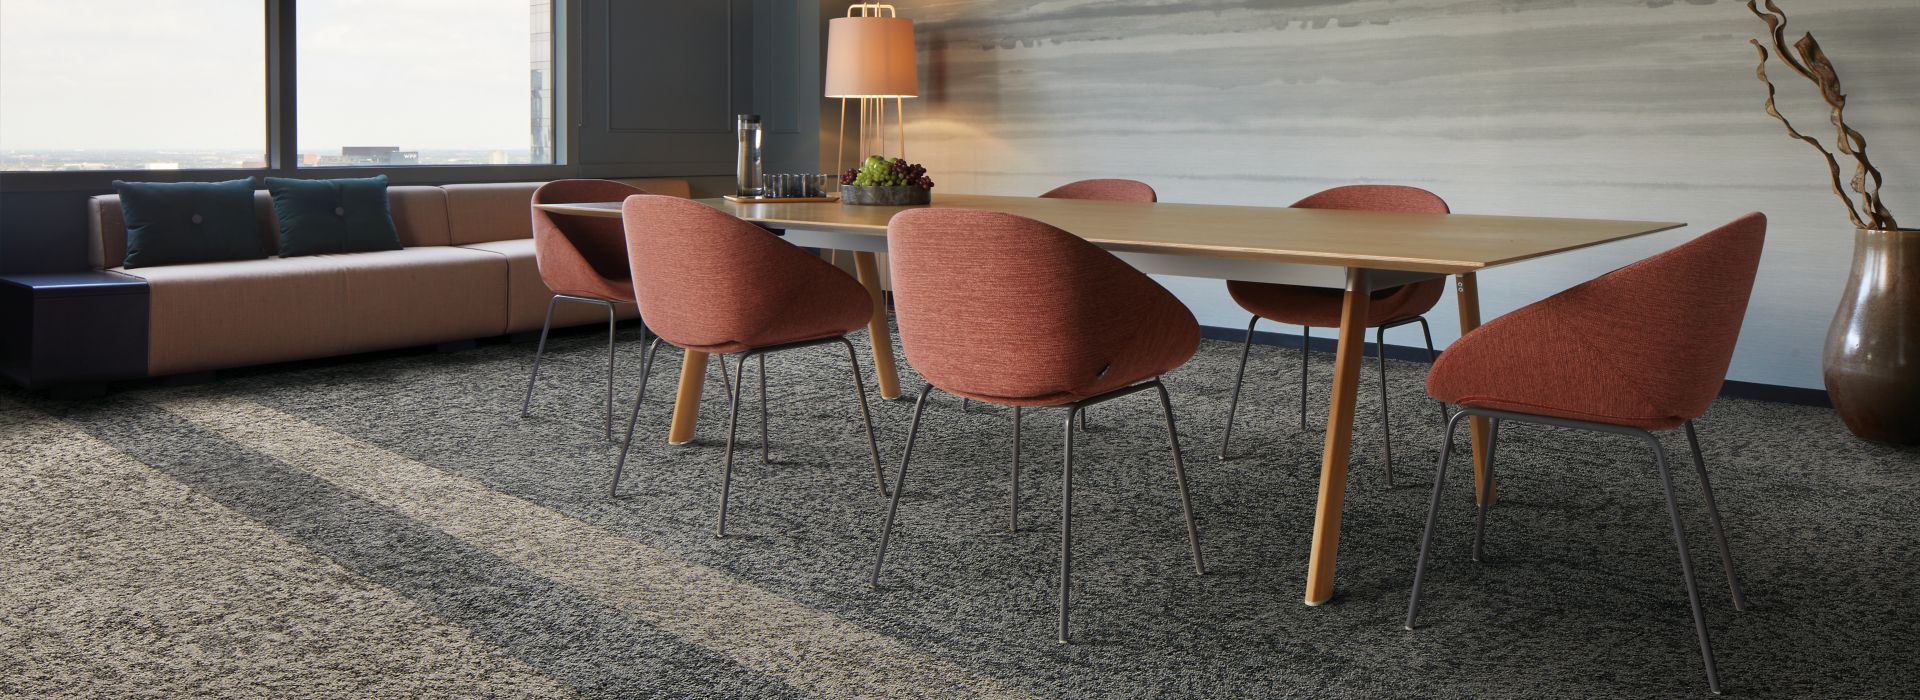 Interface Peas In A Pod carpet tile in meeting room with table, chairs, and sofa